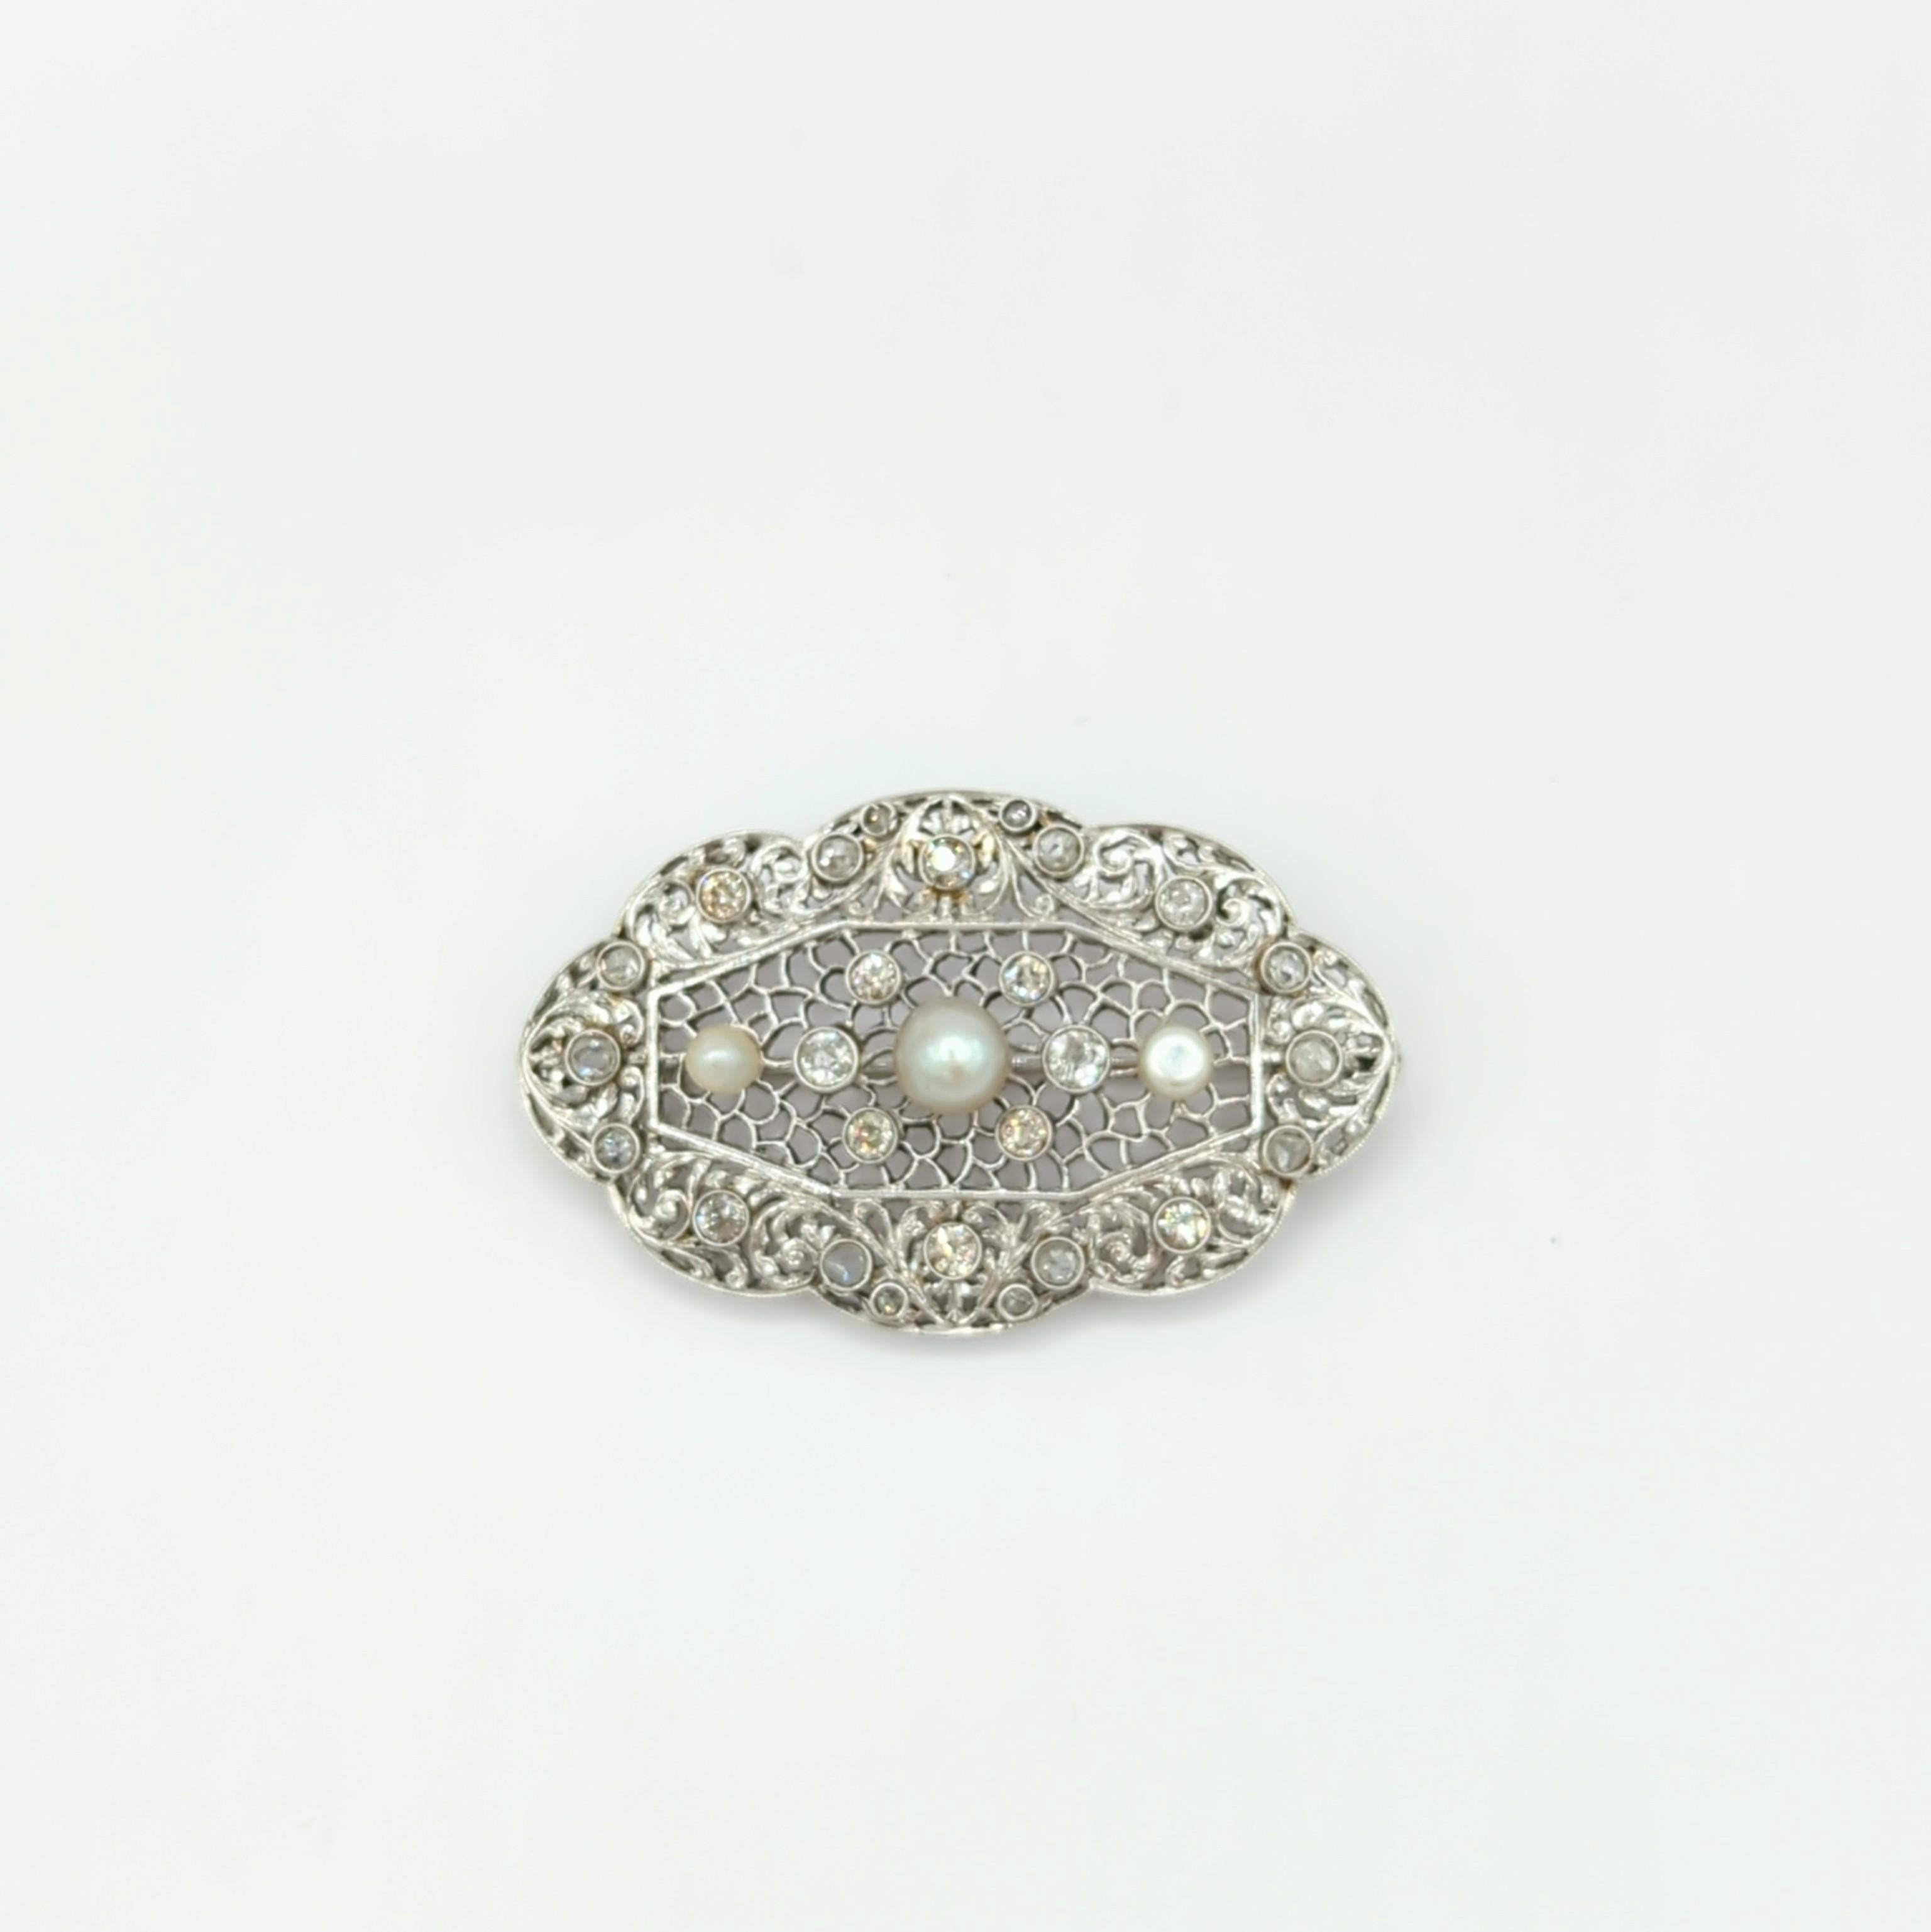 White Diamond and White Pearl Brooch in 18K White Gold 2